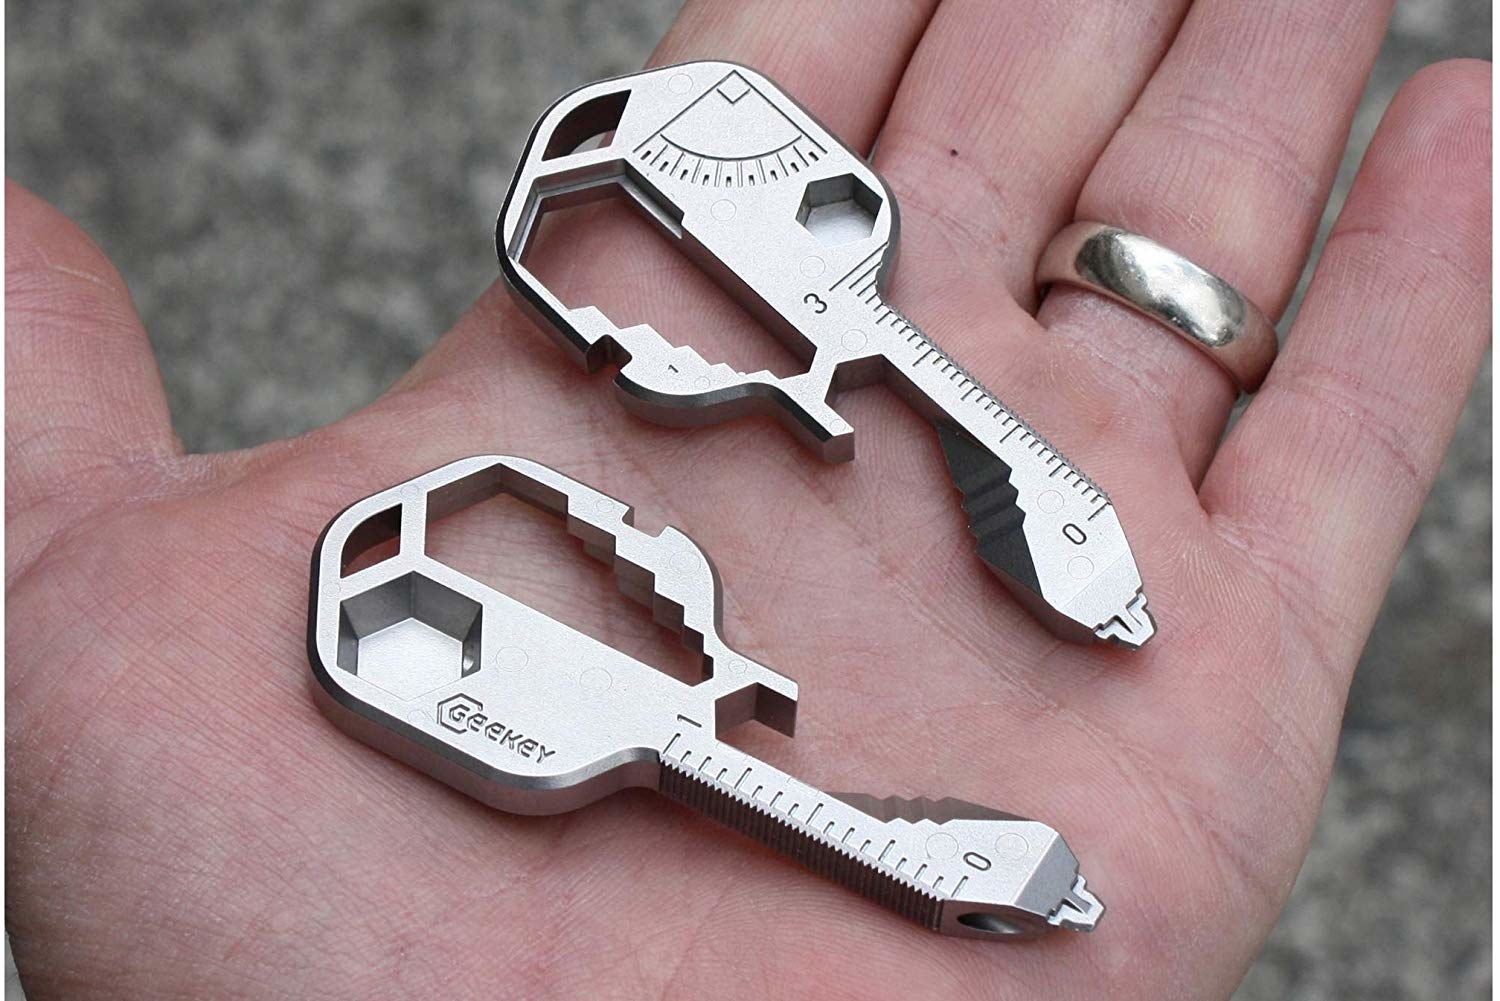 A person holds two key-shaped multi tools on their open palm